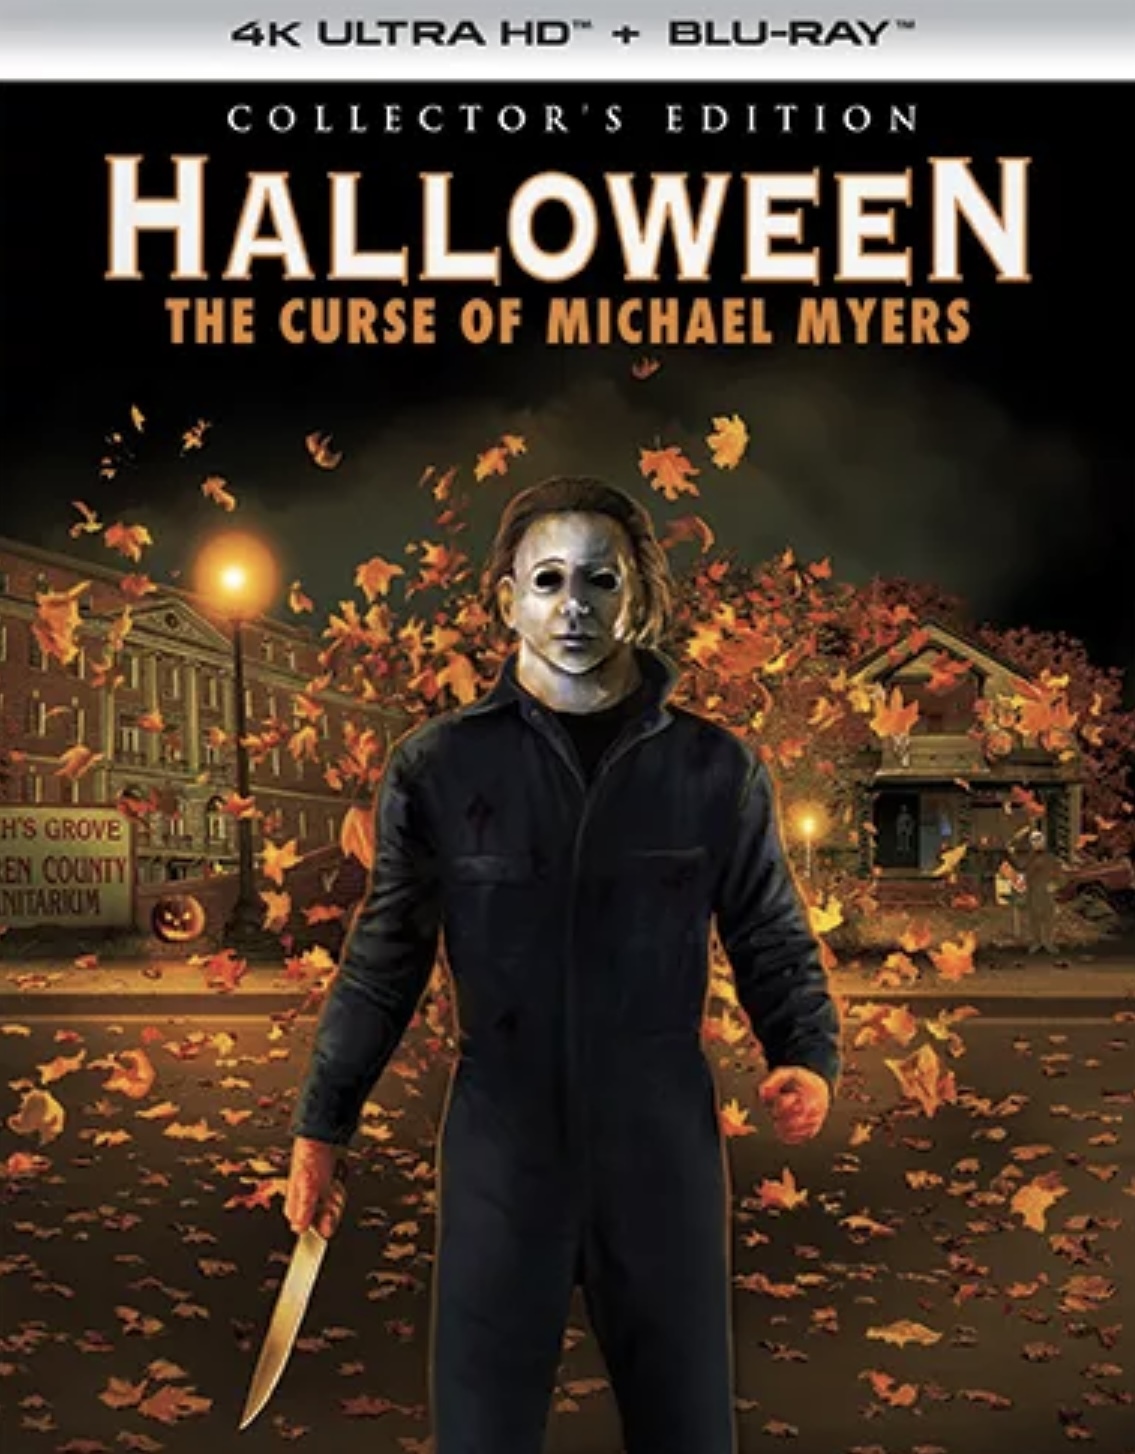 Halloween 6 The Curse of Michael Myers (1995) BluRay 2160p THEATRICAL DV HDR DTS-HD AC3 HEVC NL-RetailSub REMUX